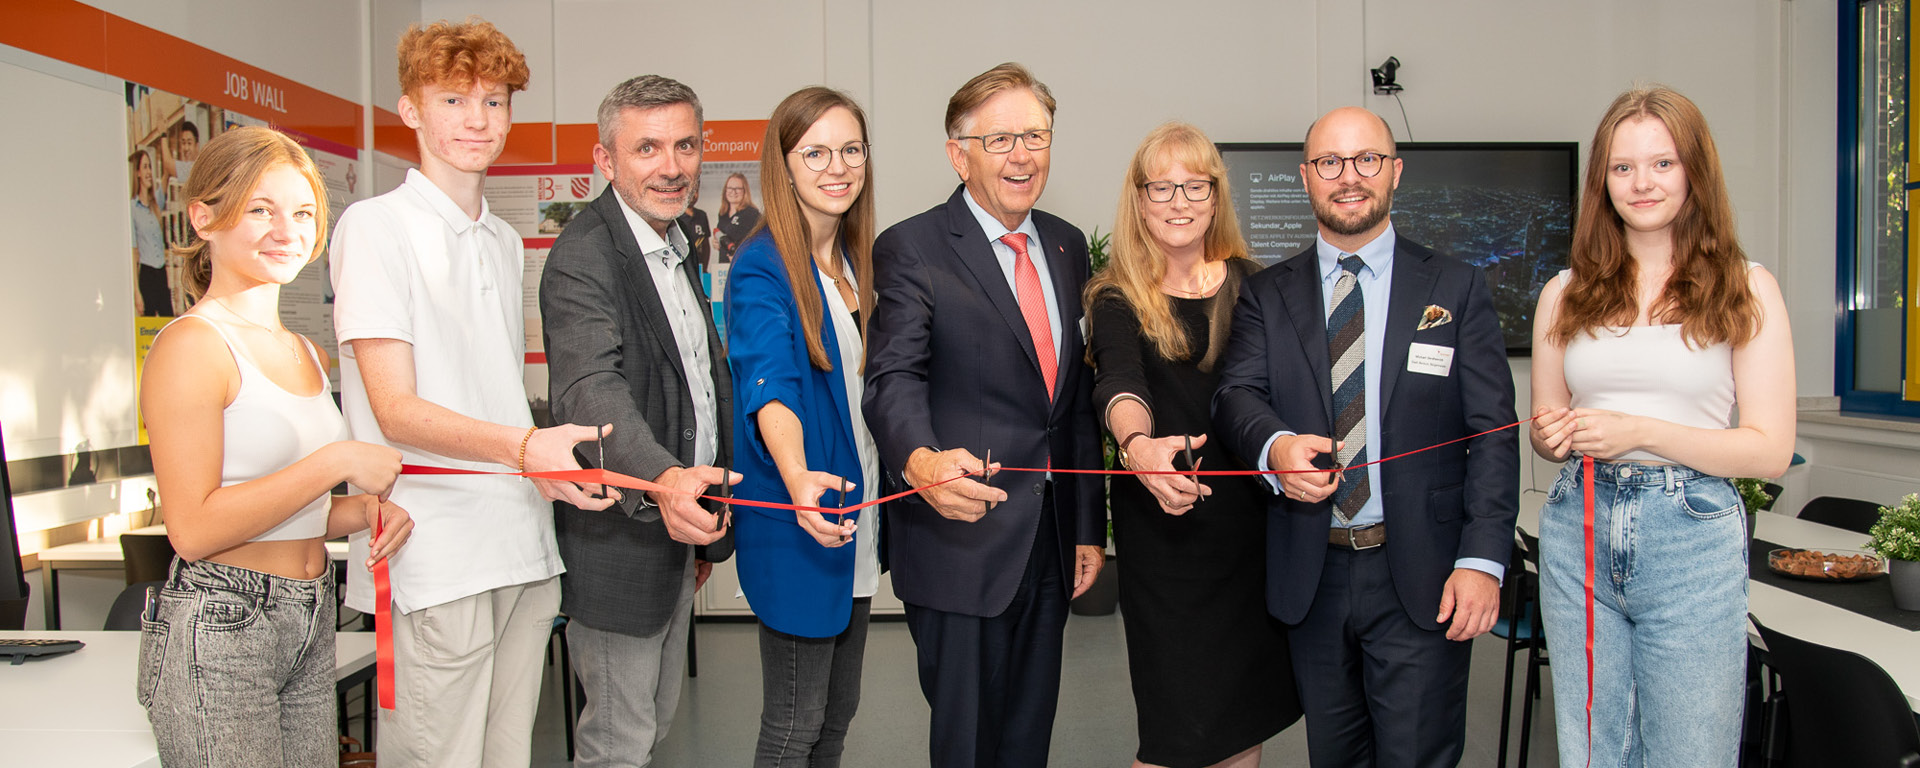 Opening ceremony Talent Company in Beckum